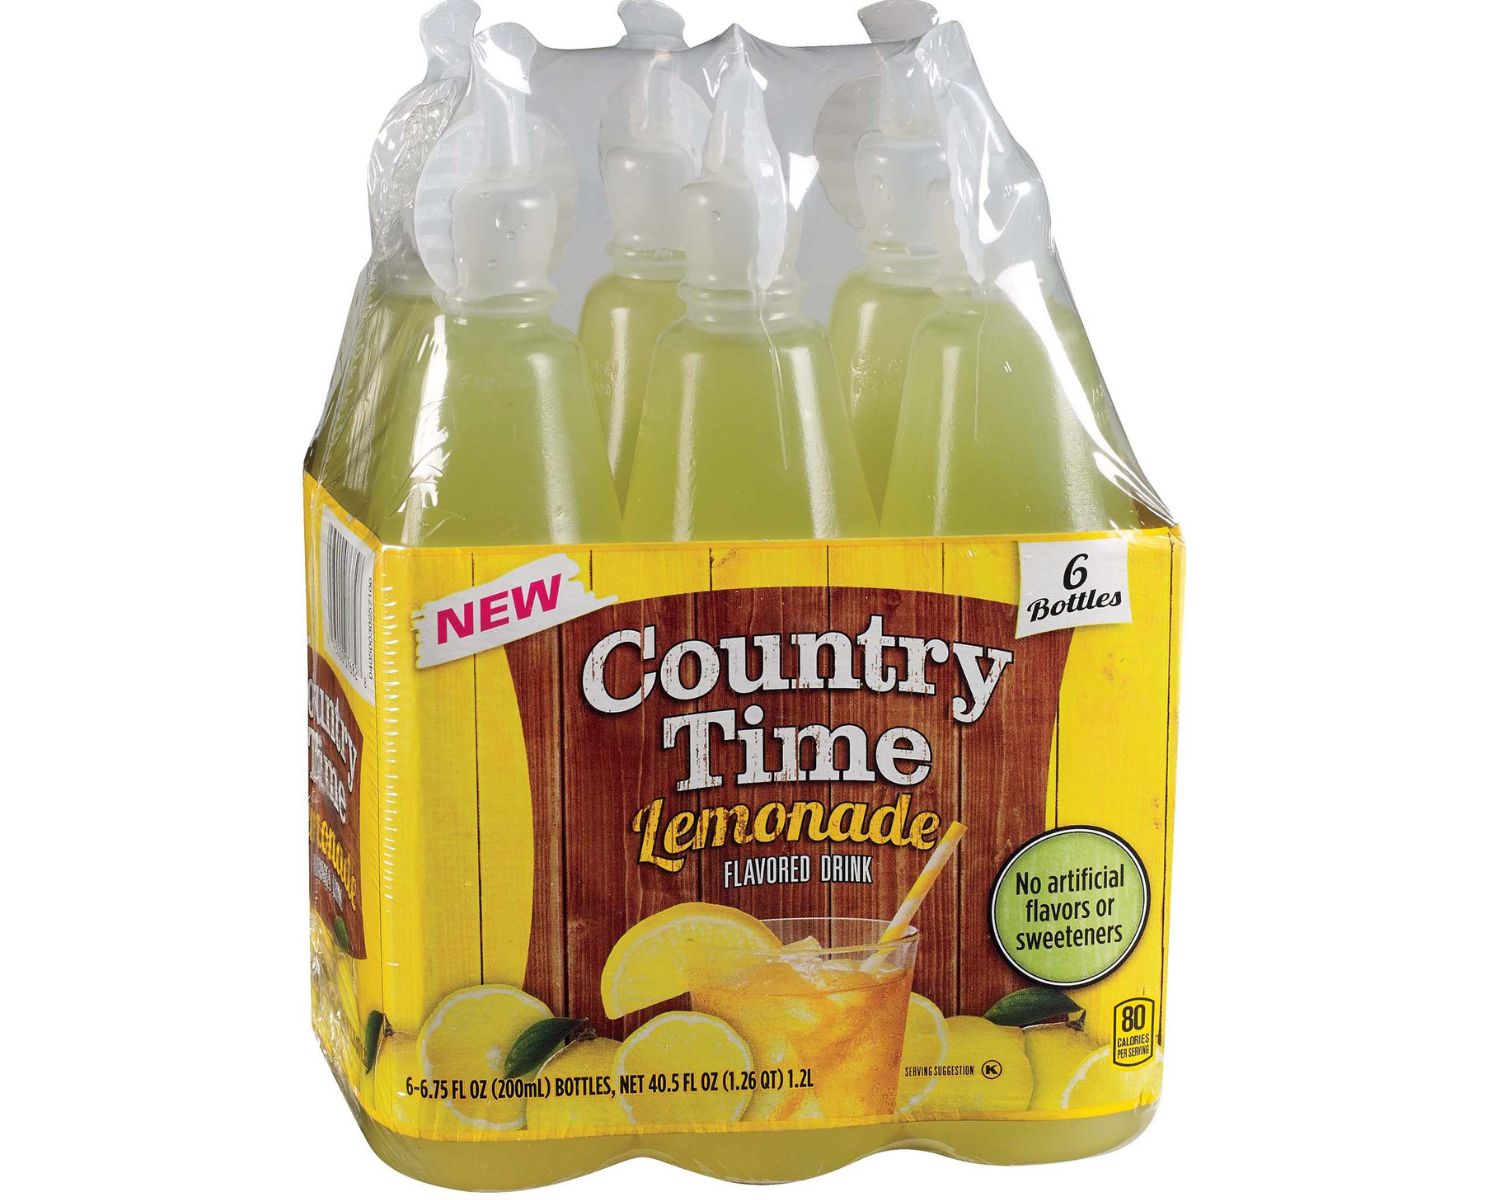 11-country-time-lemonade-nutrition-facts